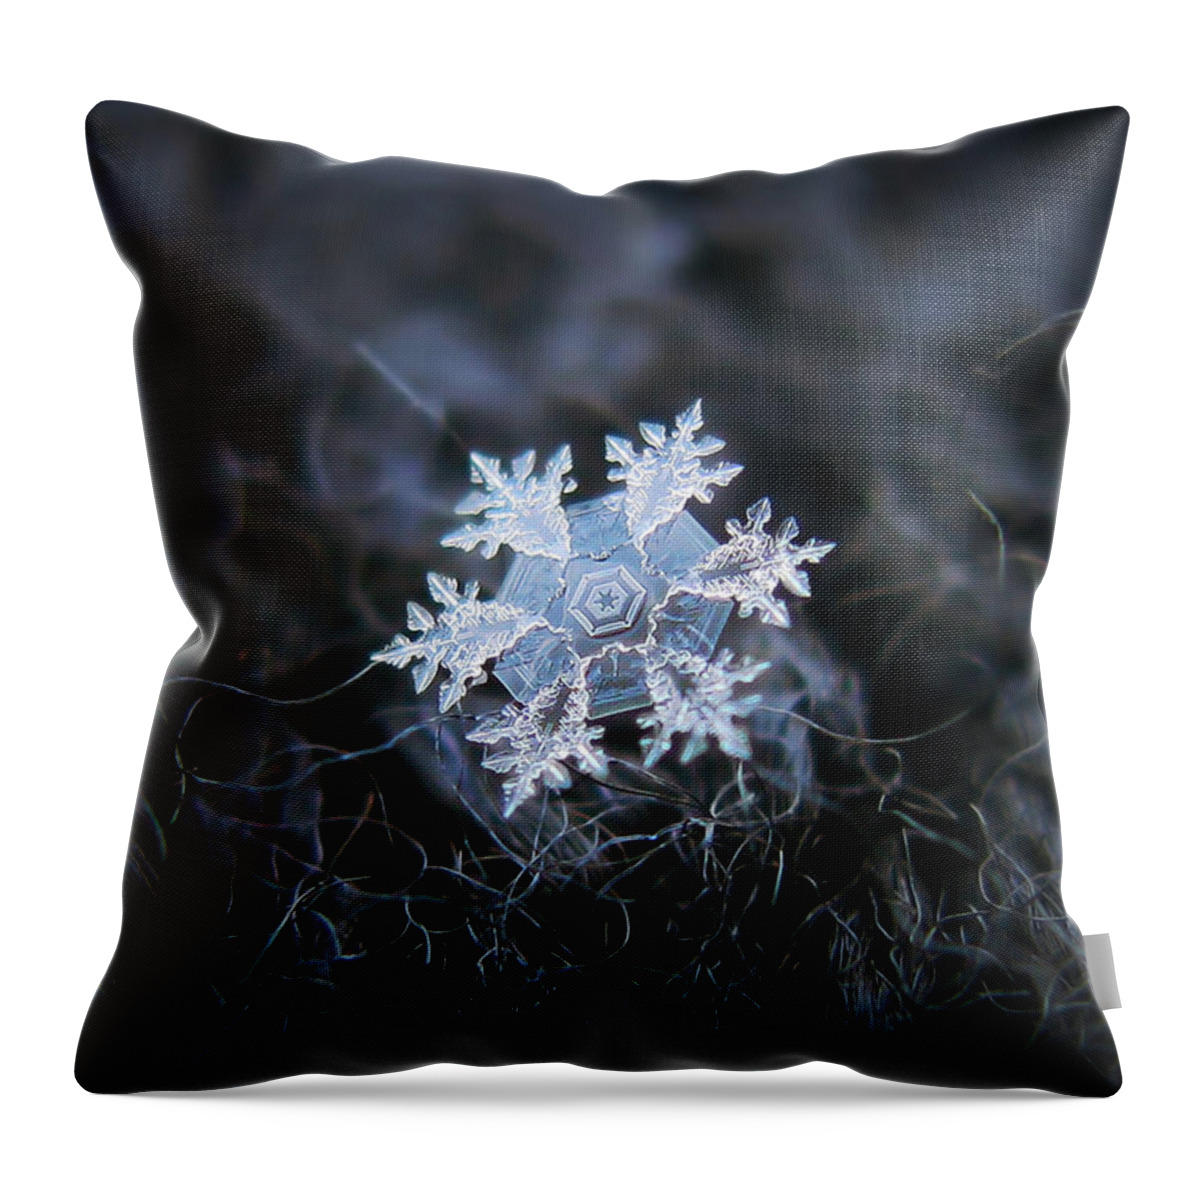 Snowflake Throw Pillow featuring the photograph Dark side by Alexey Kljatov